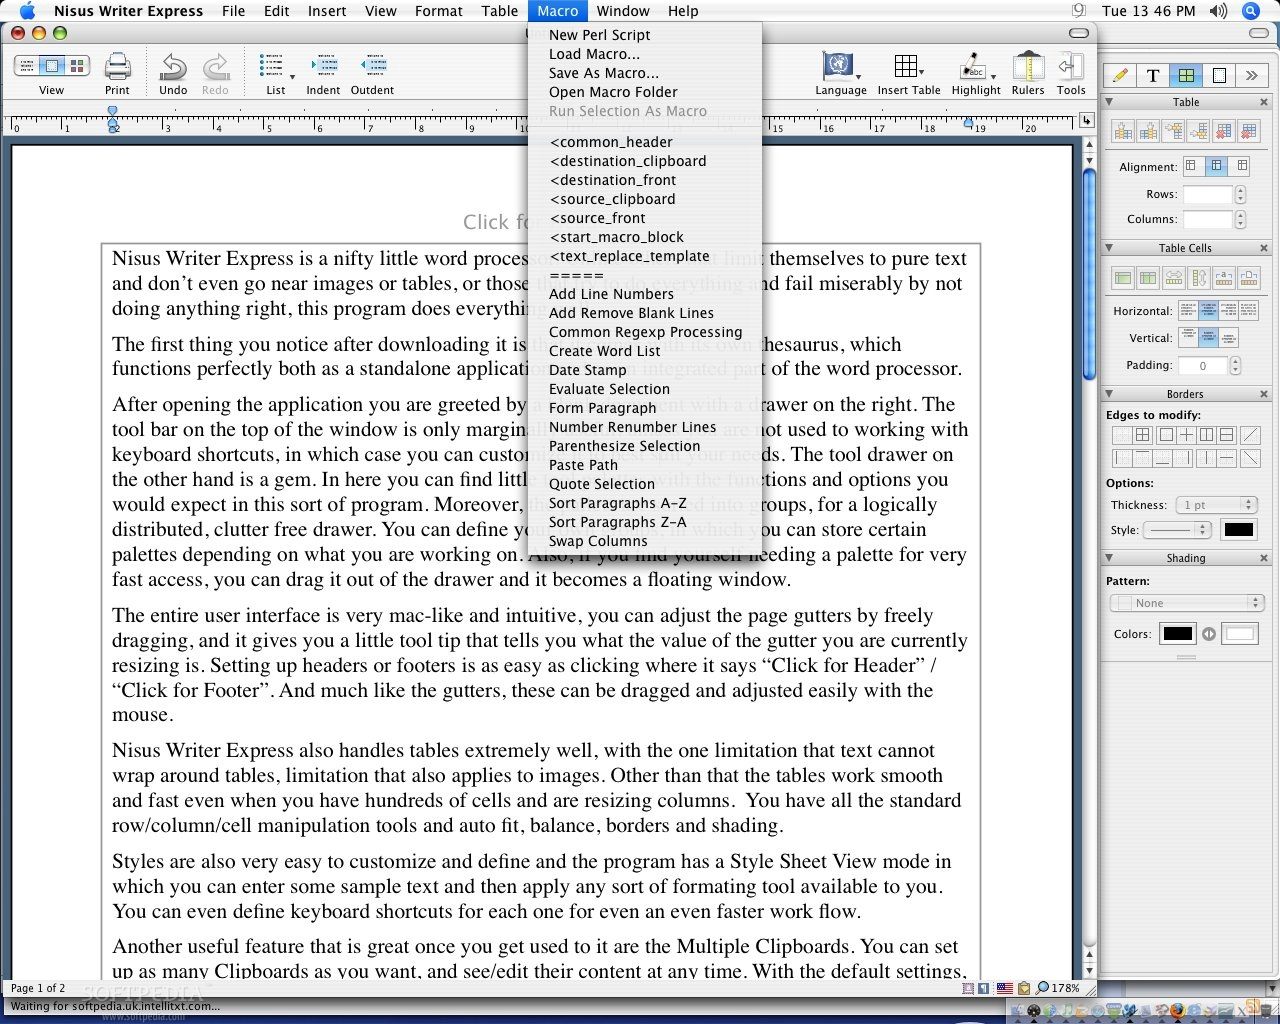 nisus writer pro footnotes space